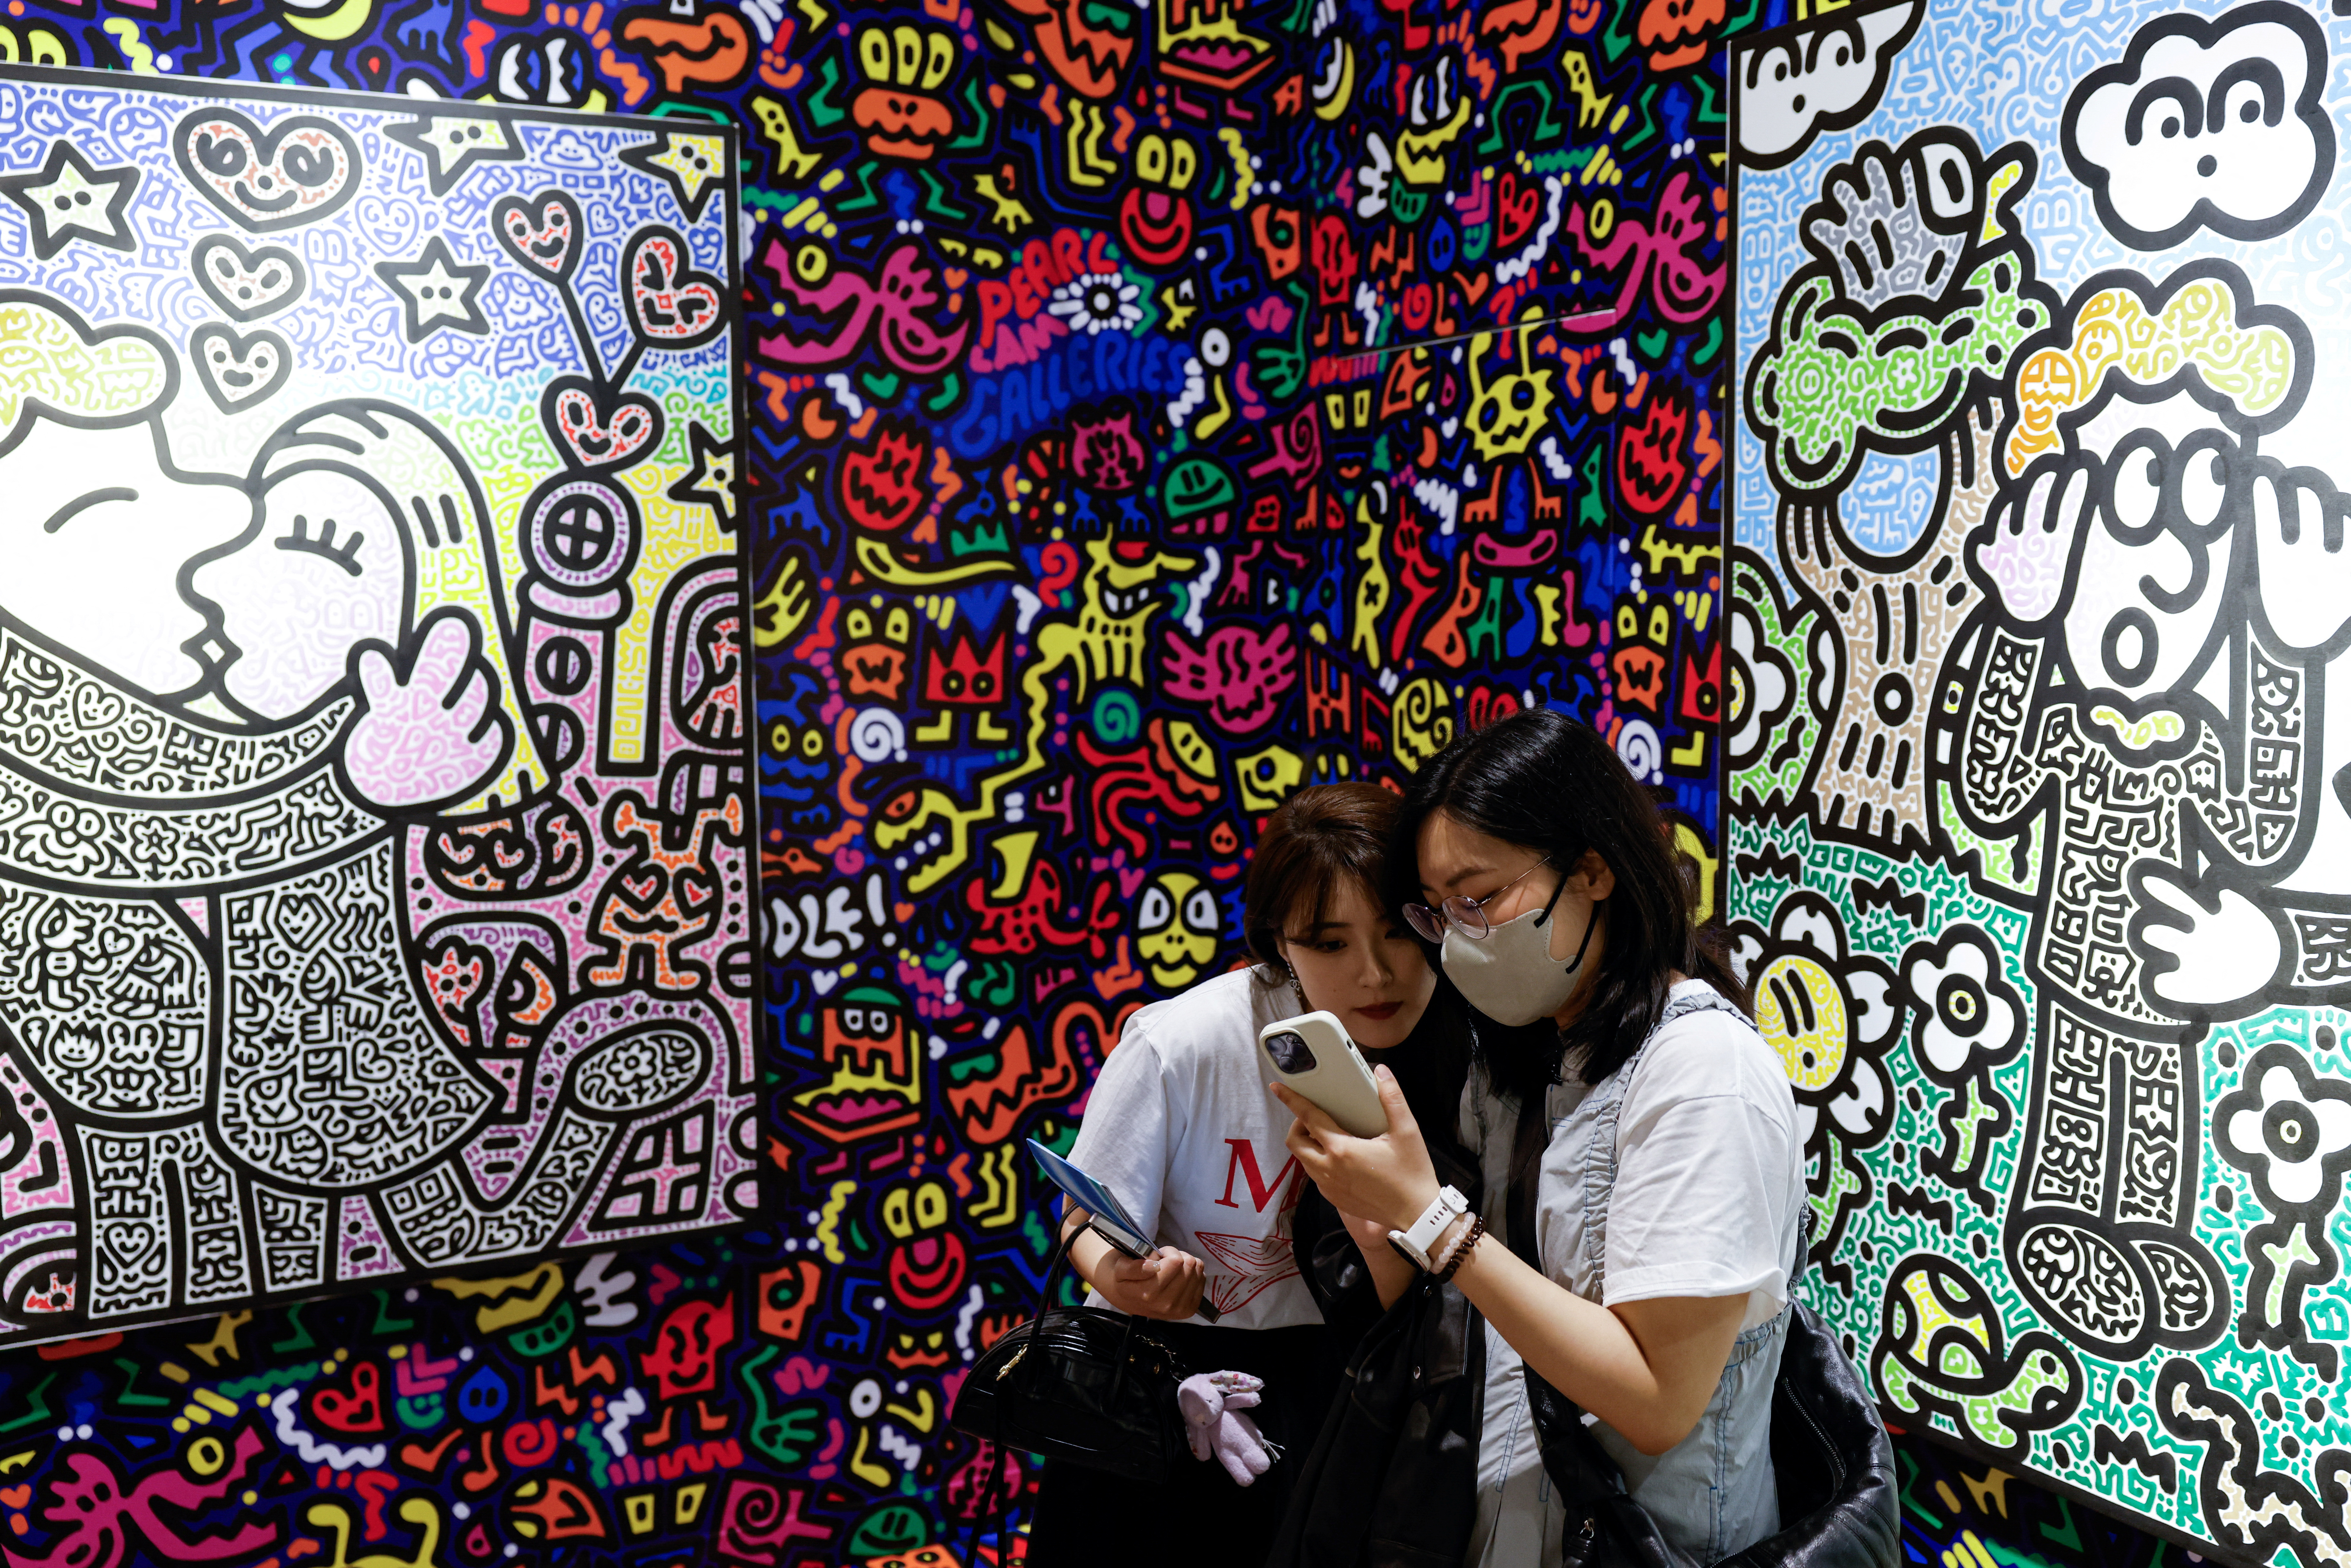 Artworks by Mr Doodle are displayed at Art Basel in Hong Kong